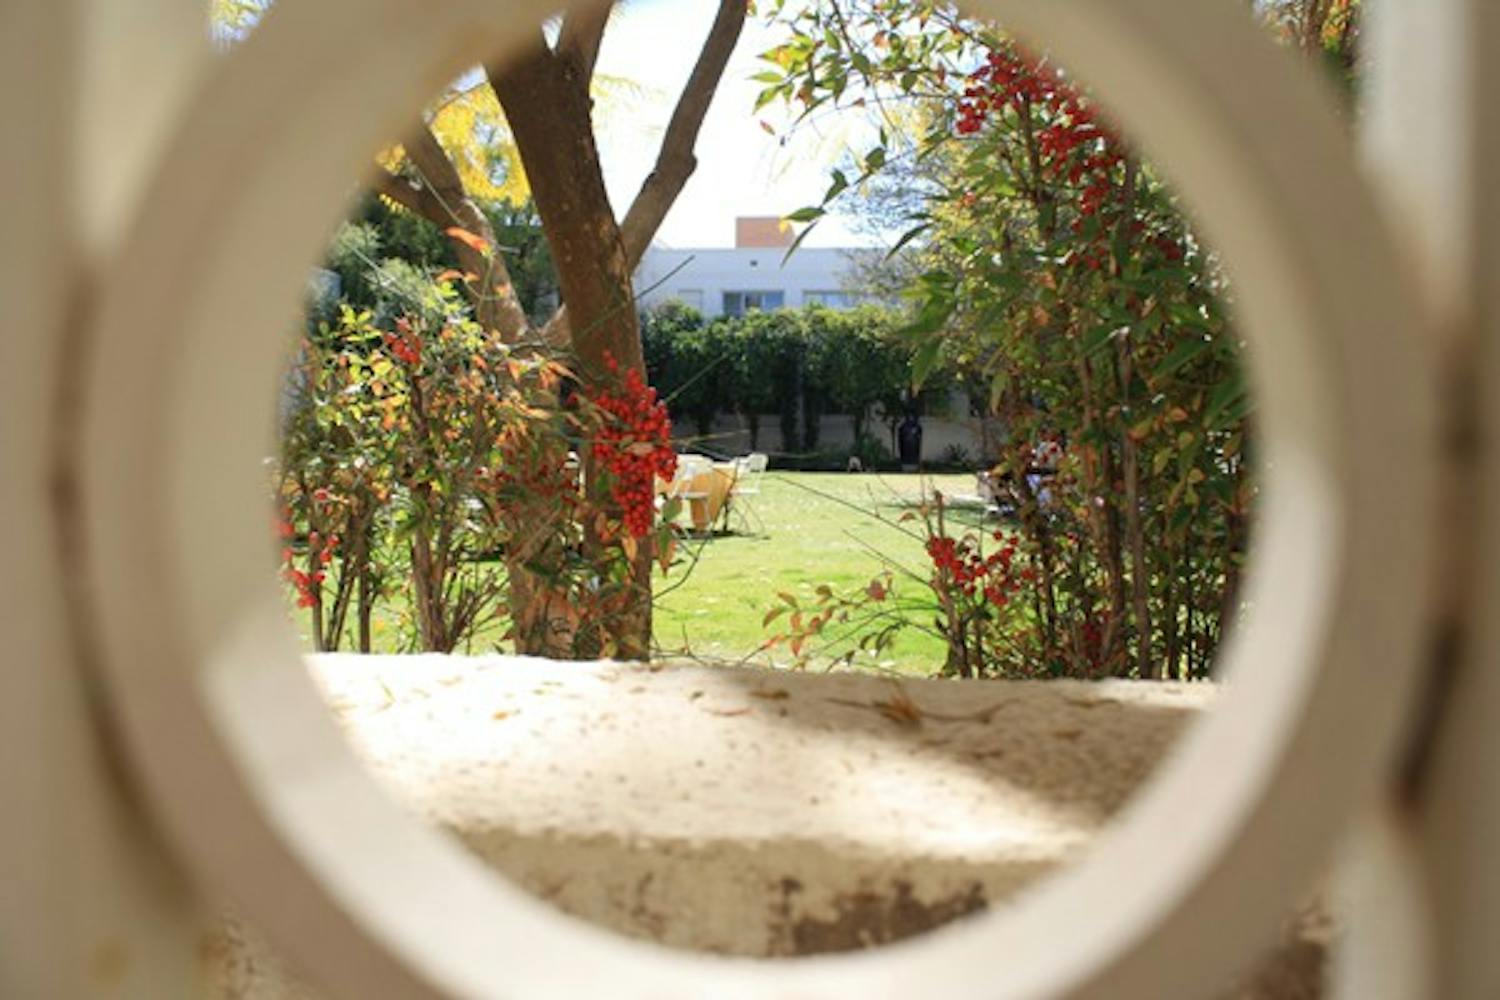 The Secret Garden, a hidden treasure on the Tempe campus, is seen through a peephole on Thursday afternoon. (Photo by Jessie Wardarski)